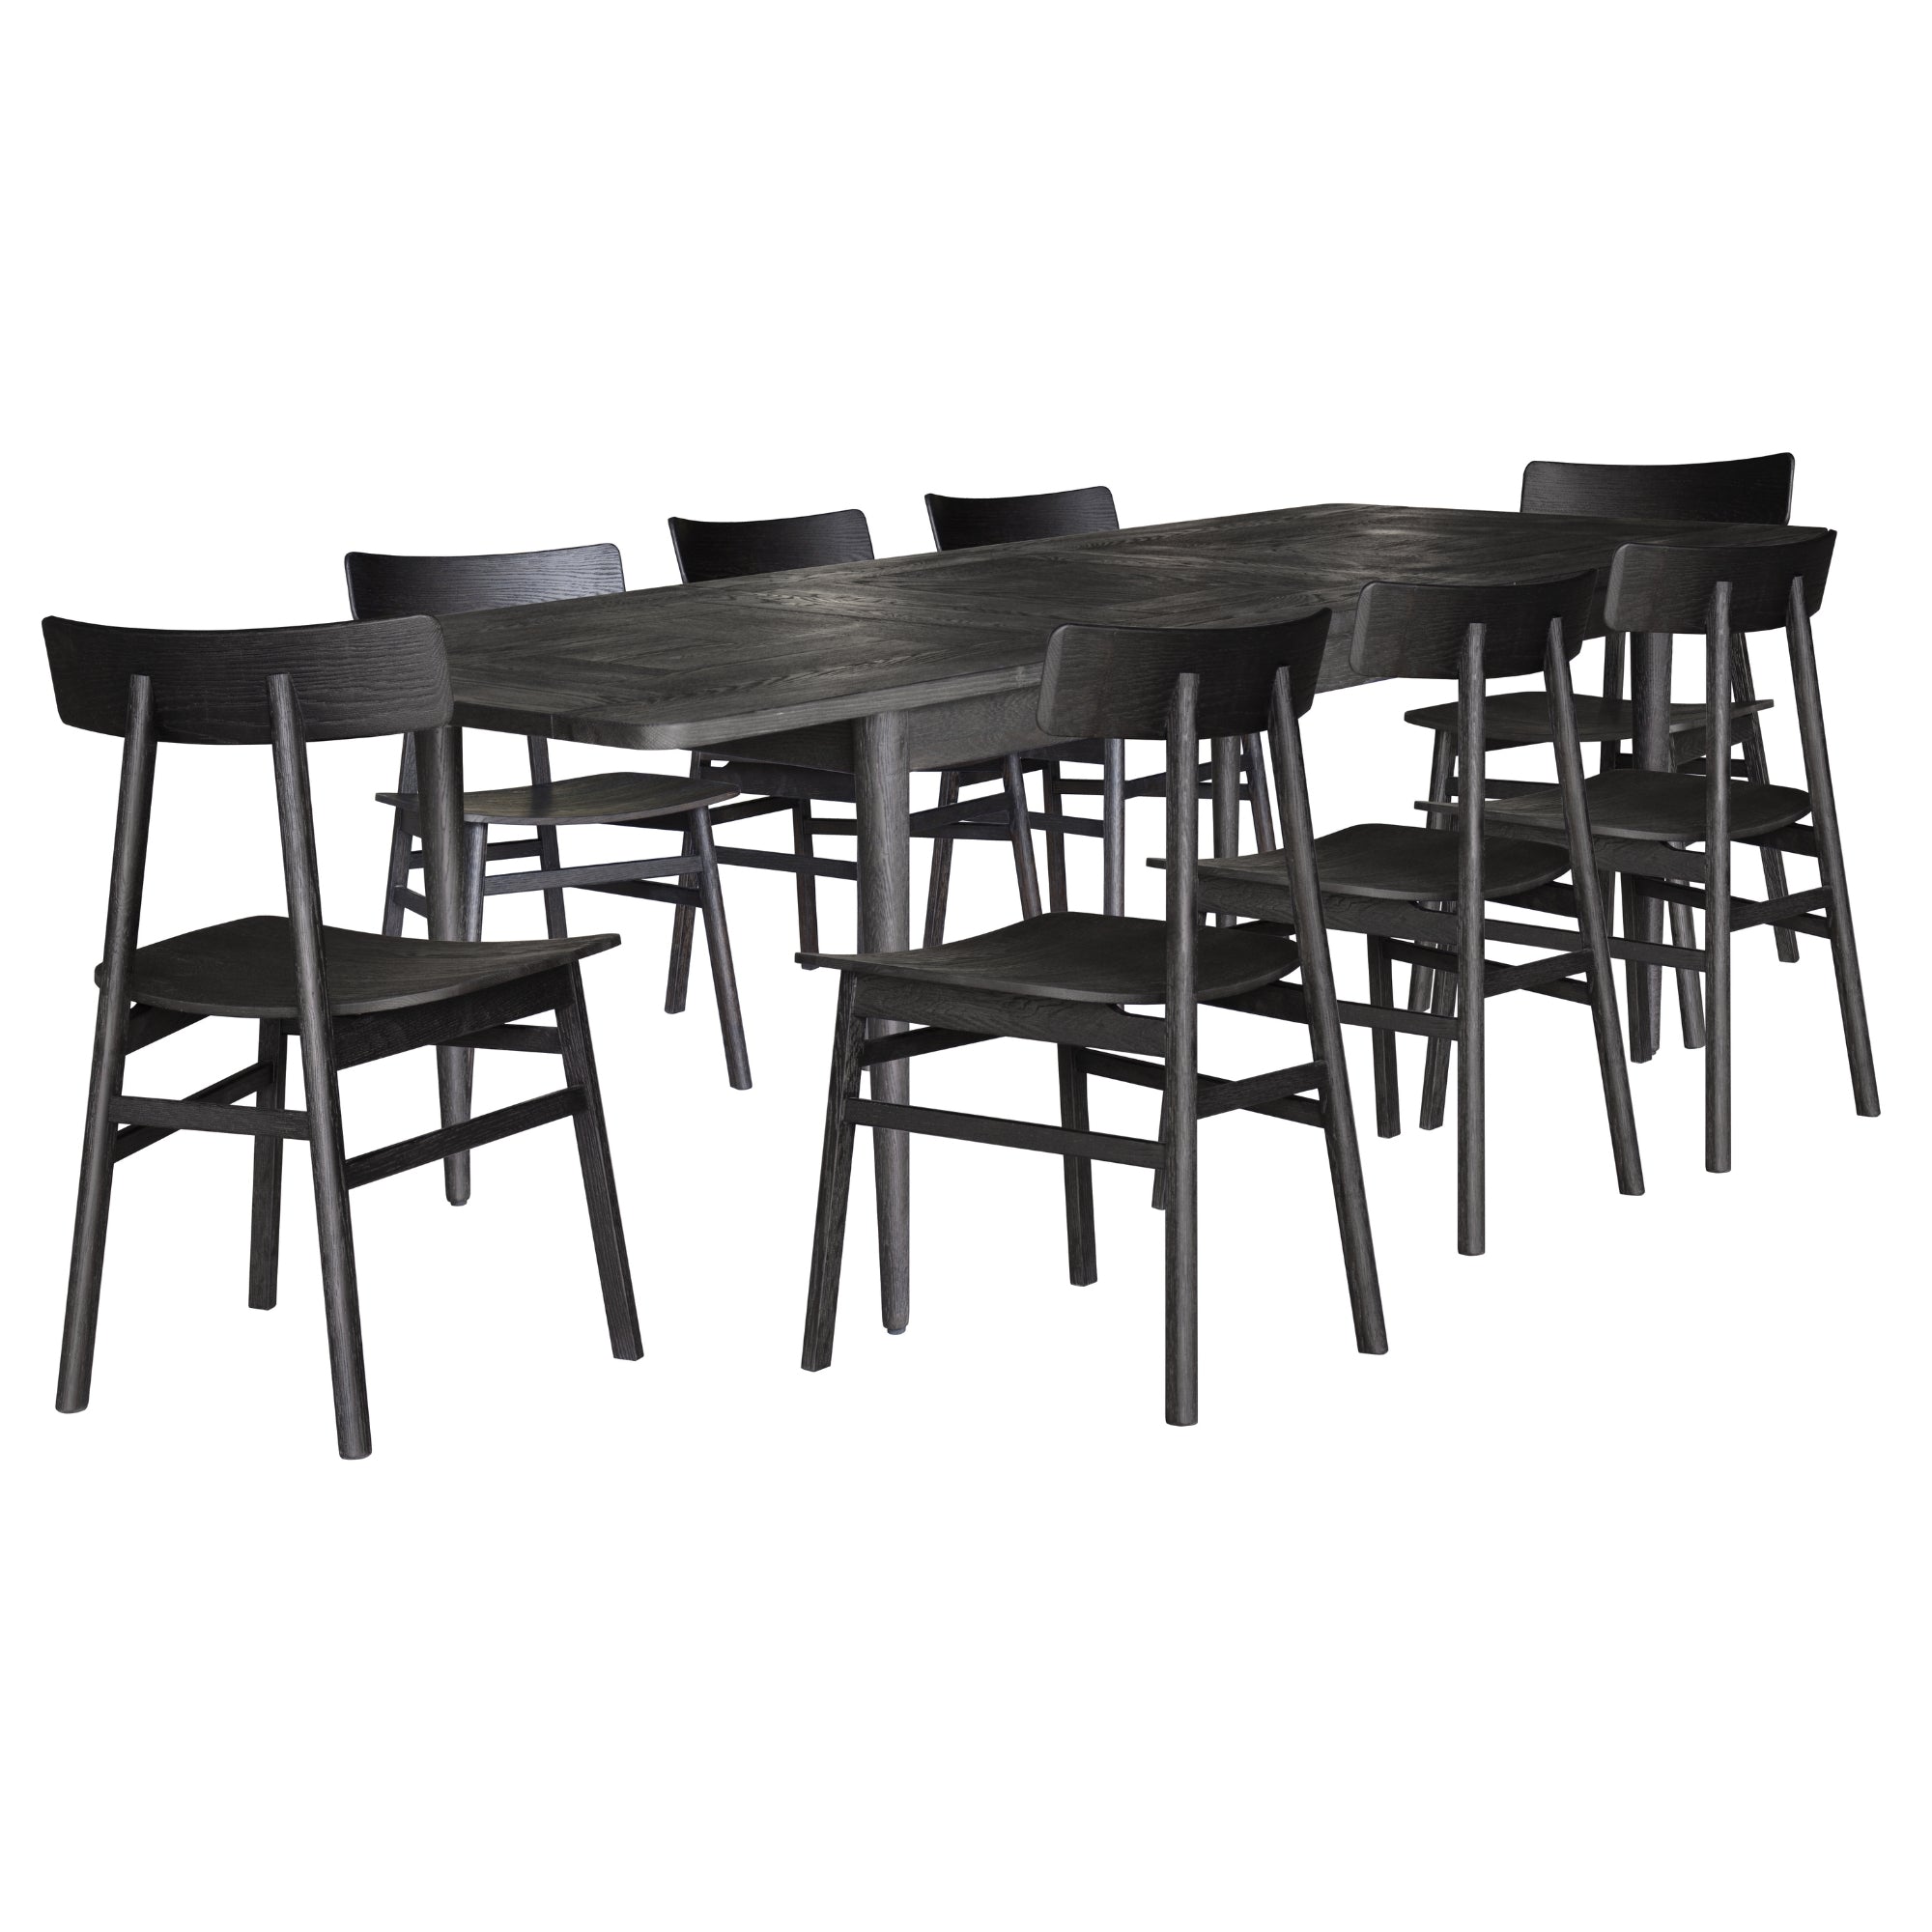 Claire 9pc Dining Set Table Extendable 170-230cm Oak Timber Seat Chair - Black - SILBERSHELL